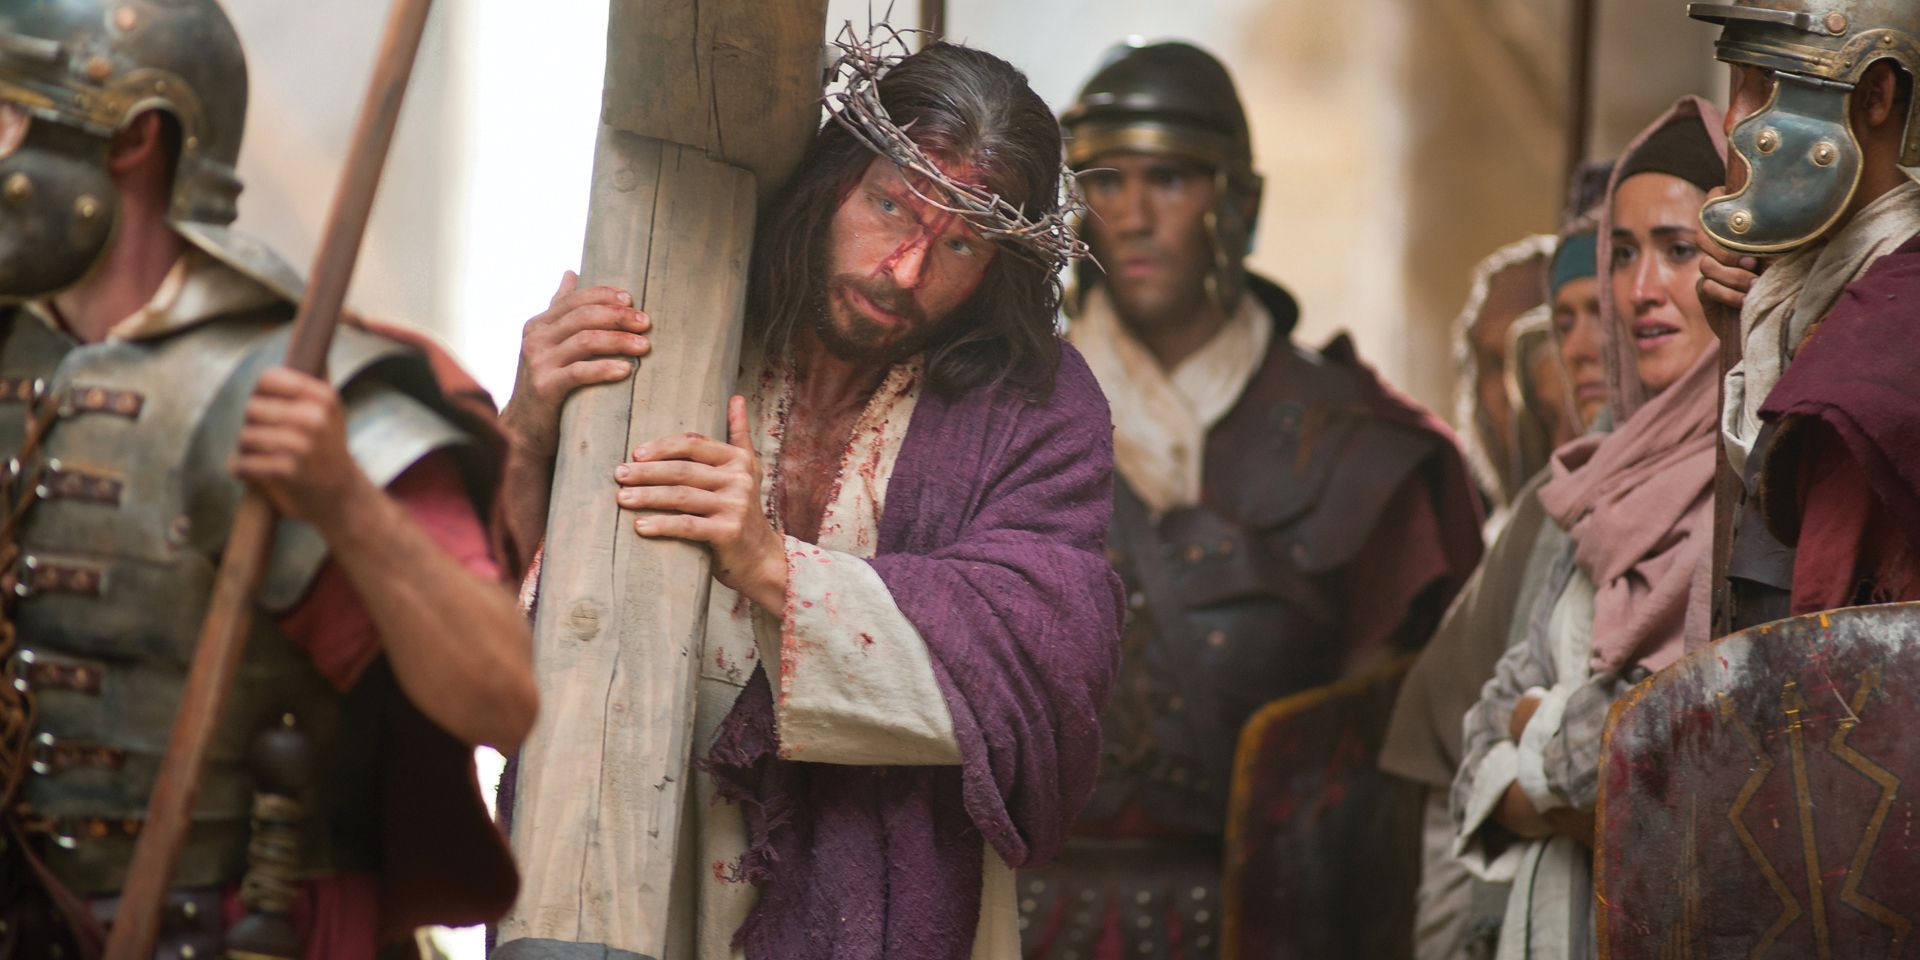 Jesus carries His cross on the way to His Crucifixion. 